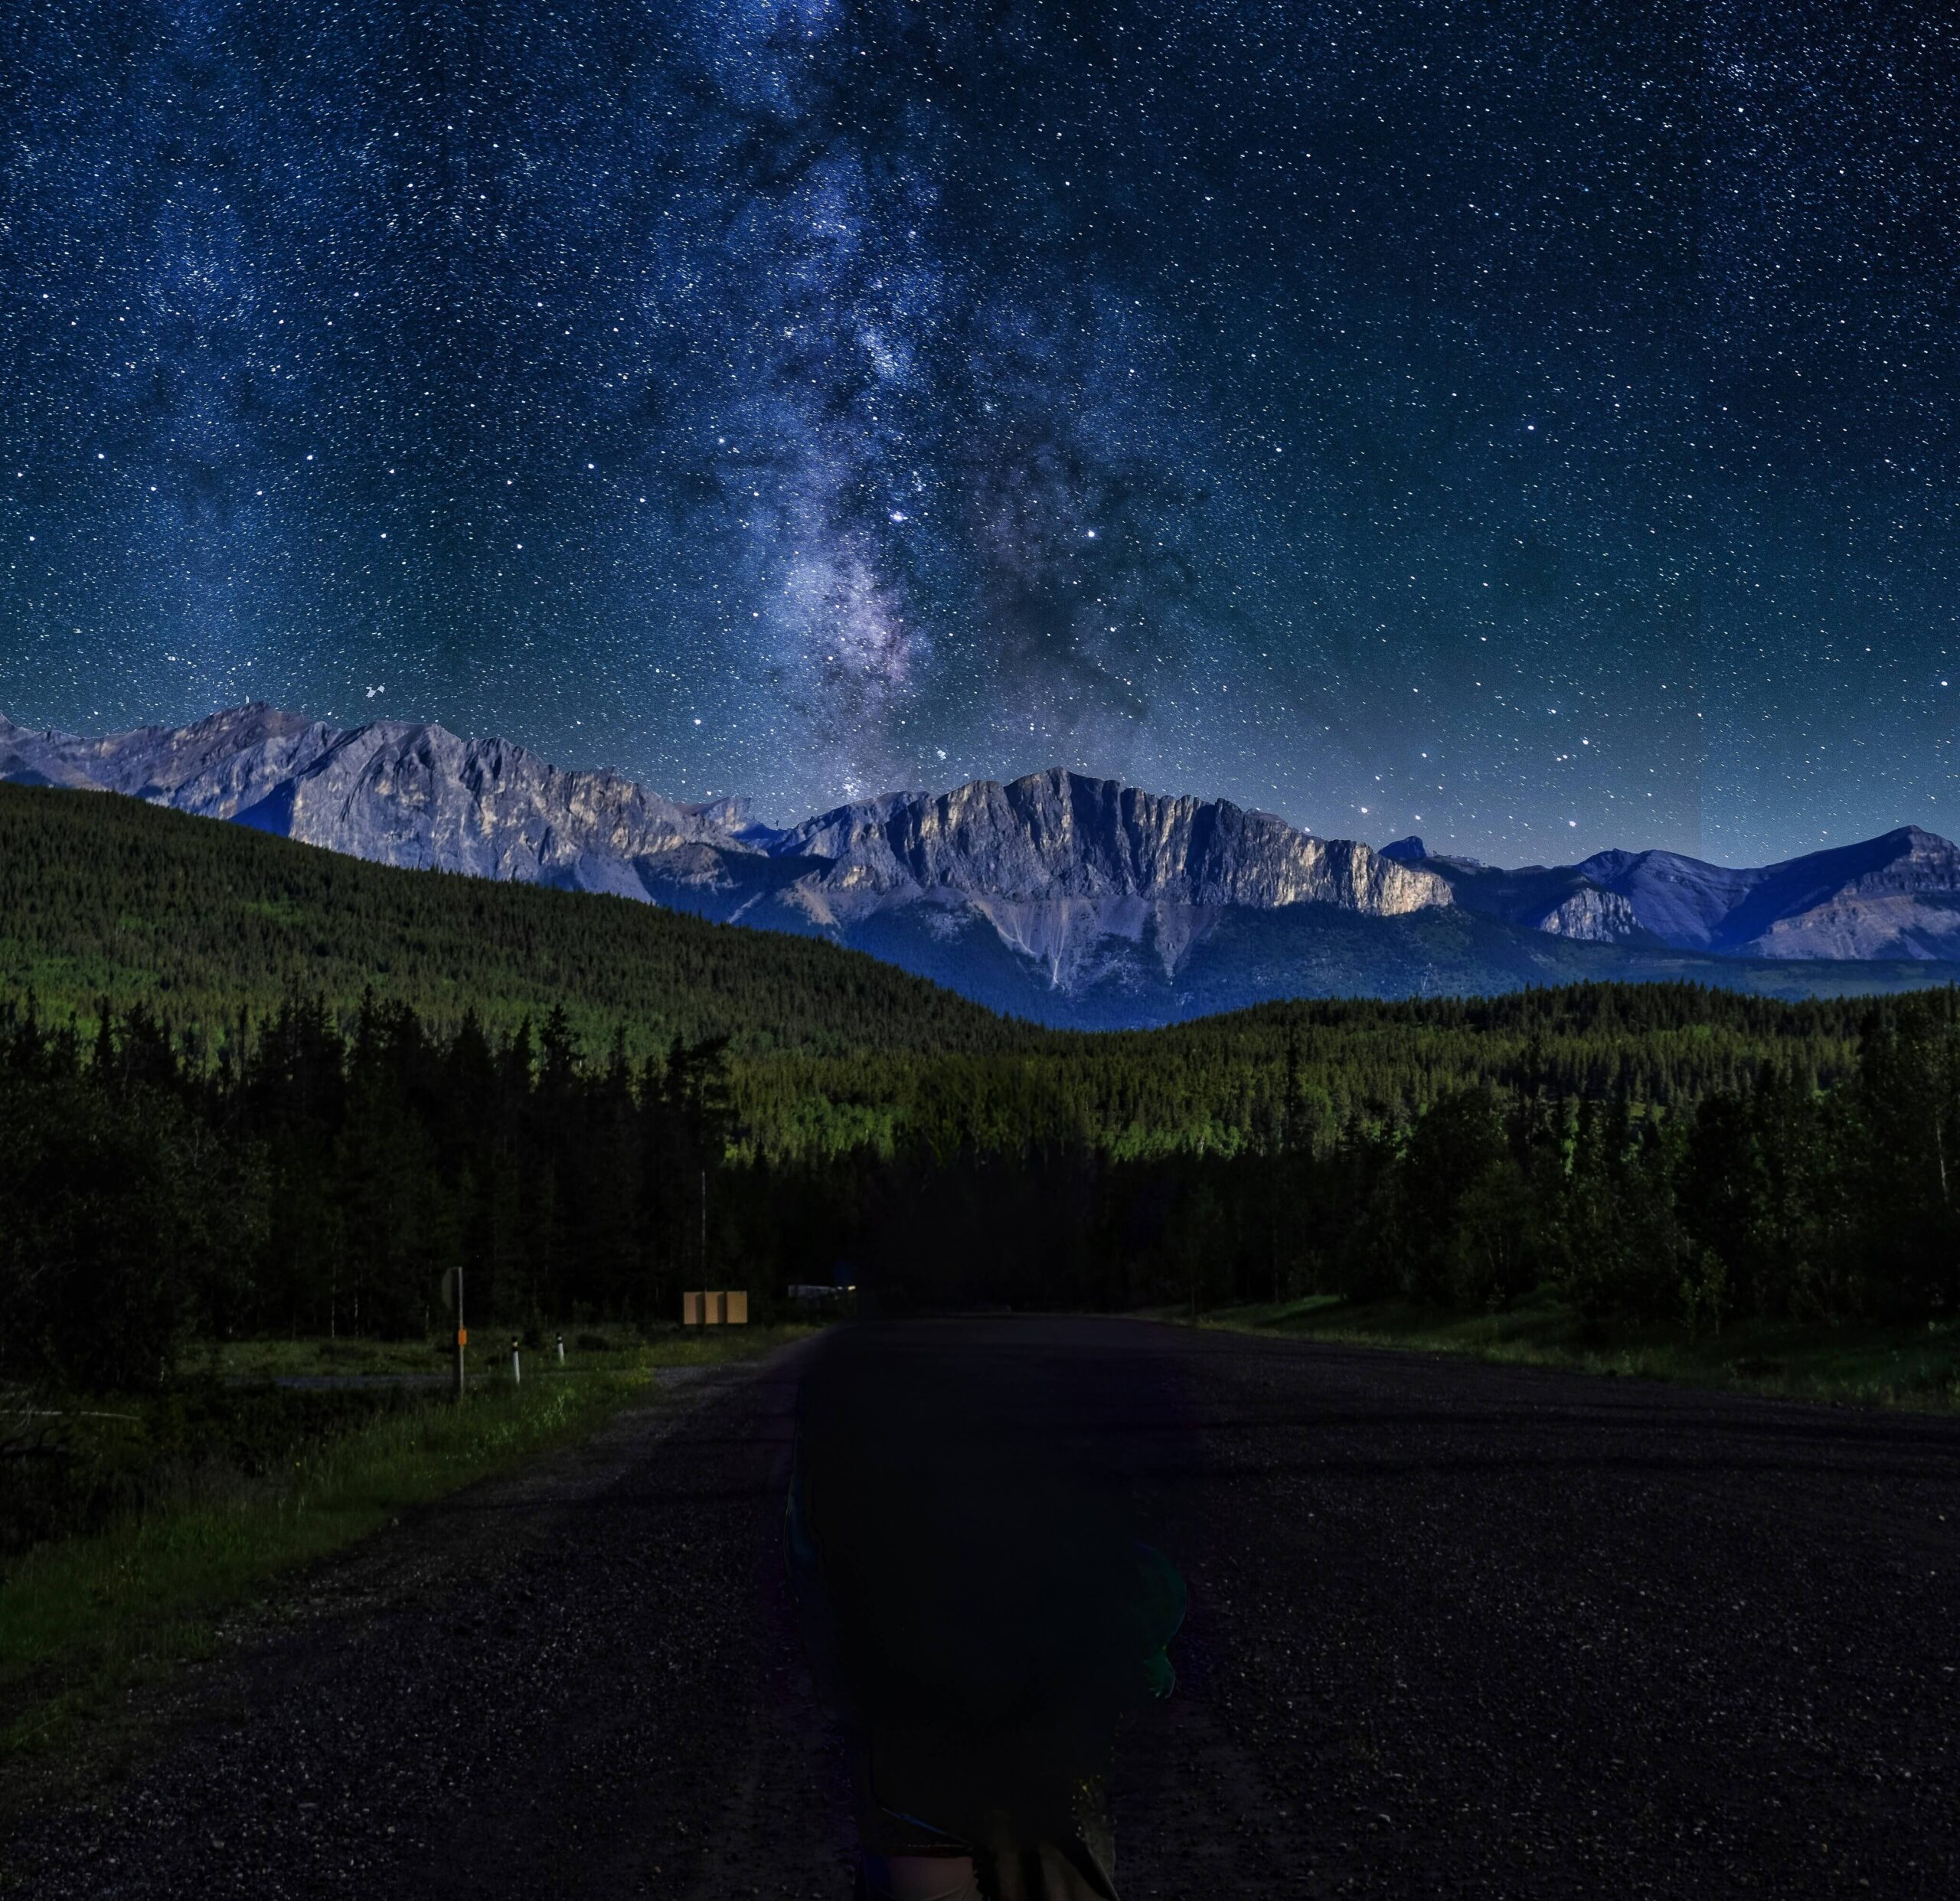 Experience Wonders of the Night Sky from the Canadian Rocky Mountains with Kananaskis Outfitters at the Grizzly Classic Men's Artistic Gymnastics Competition.